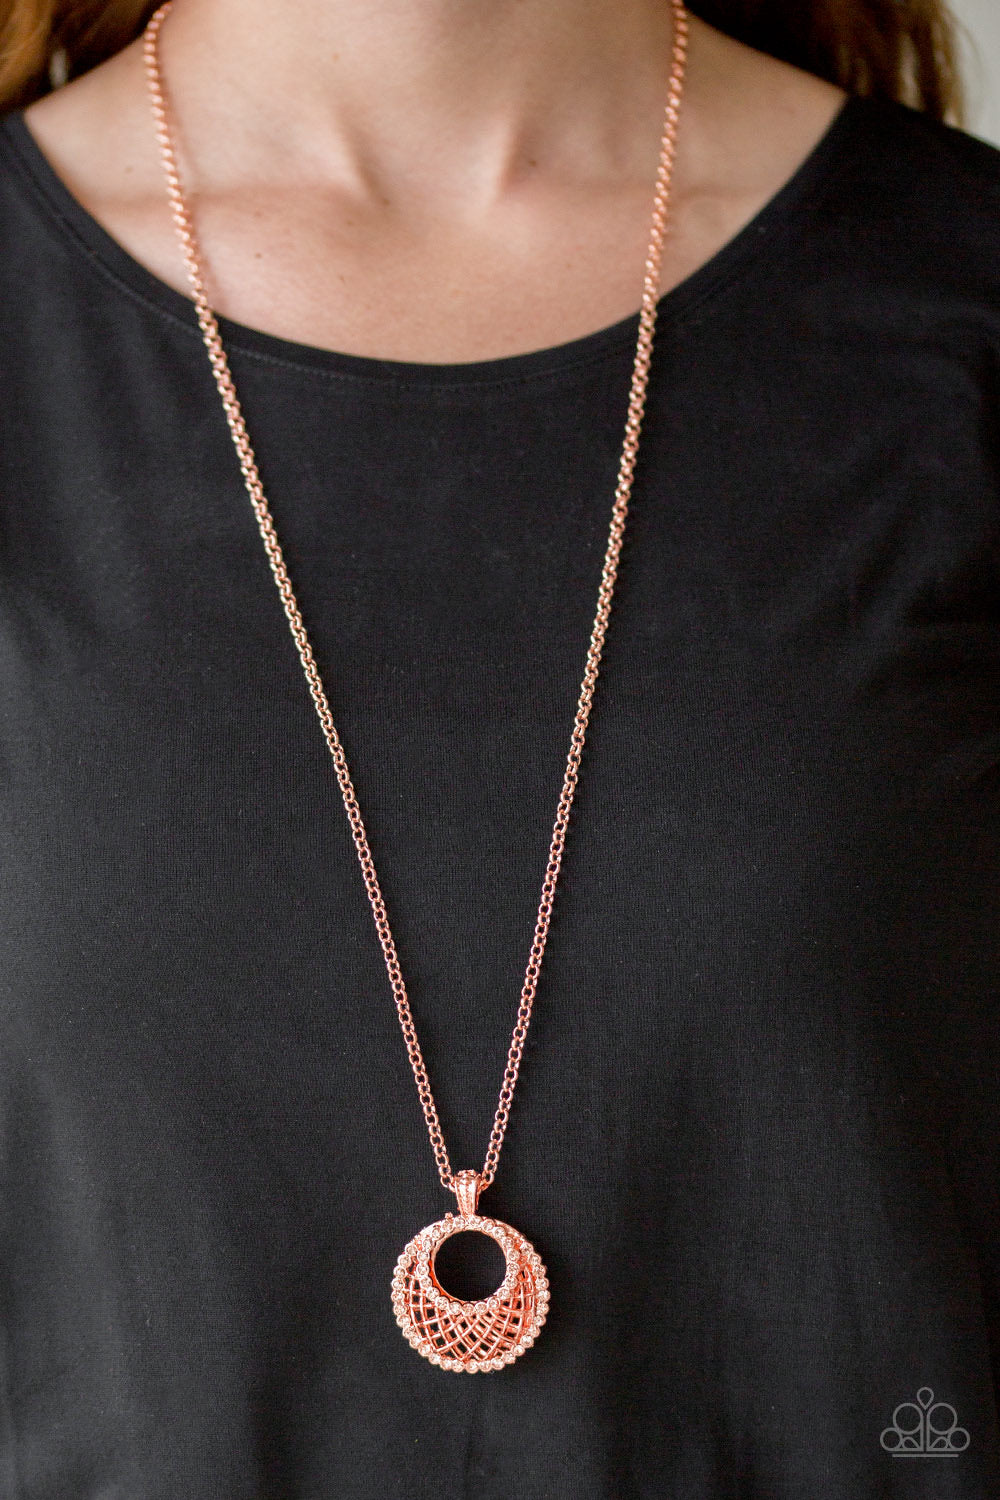 Net Worth Necklace - Copper